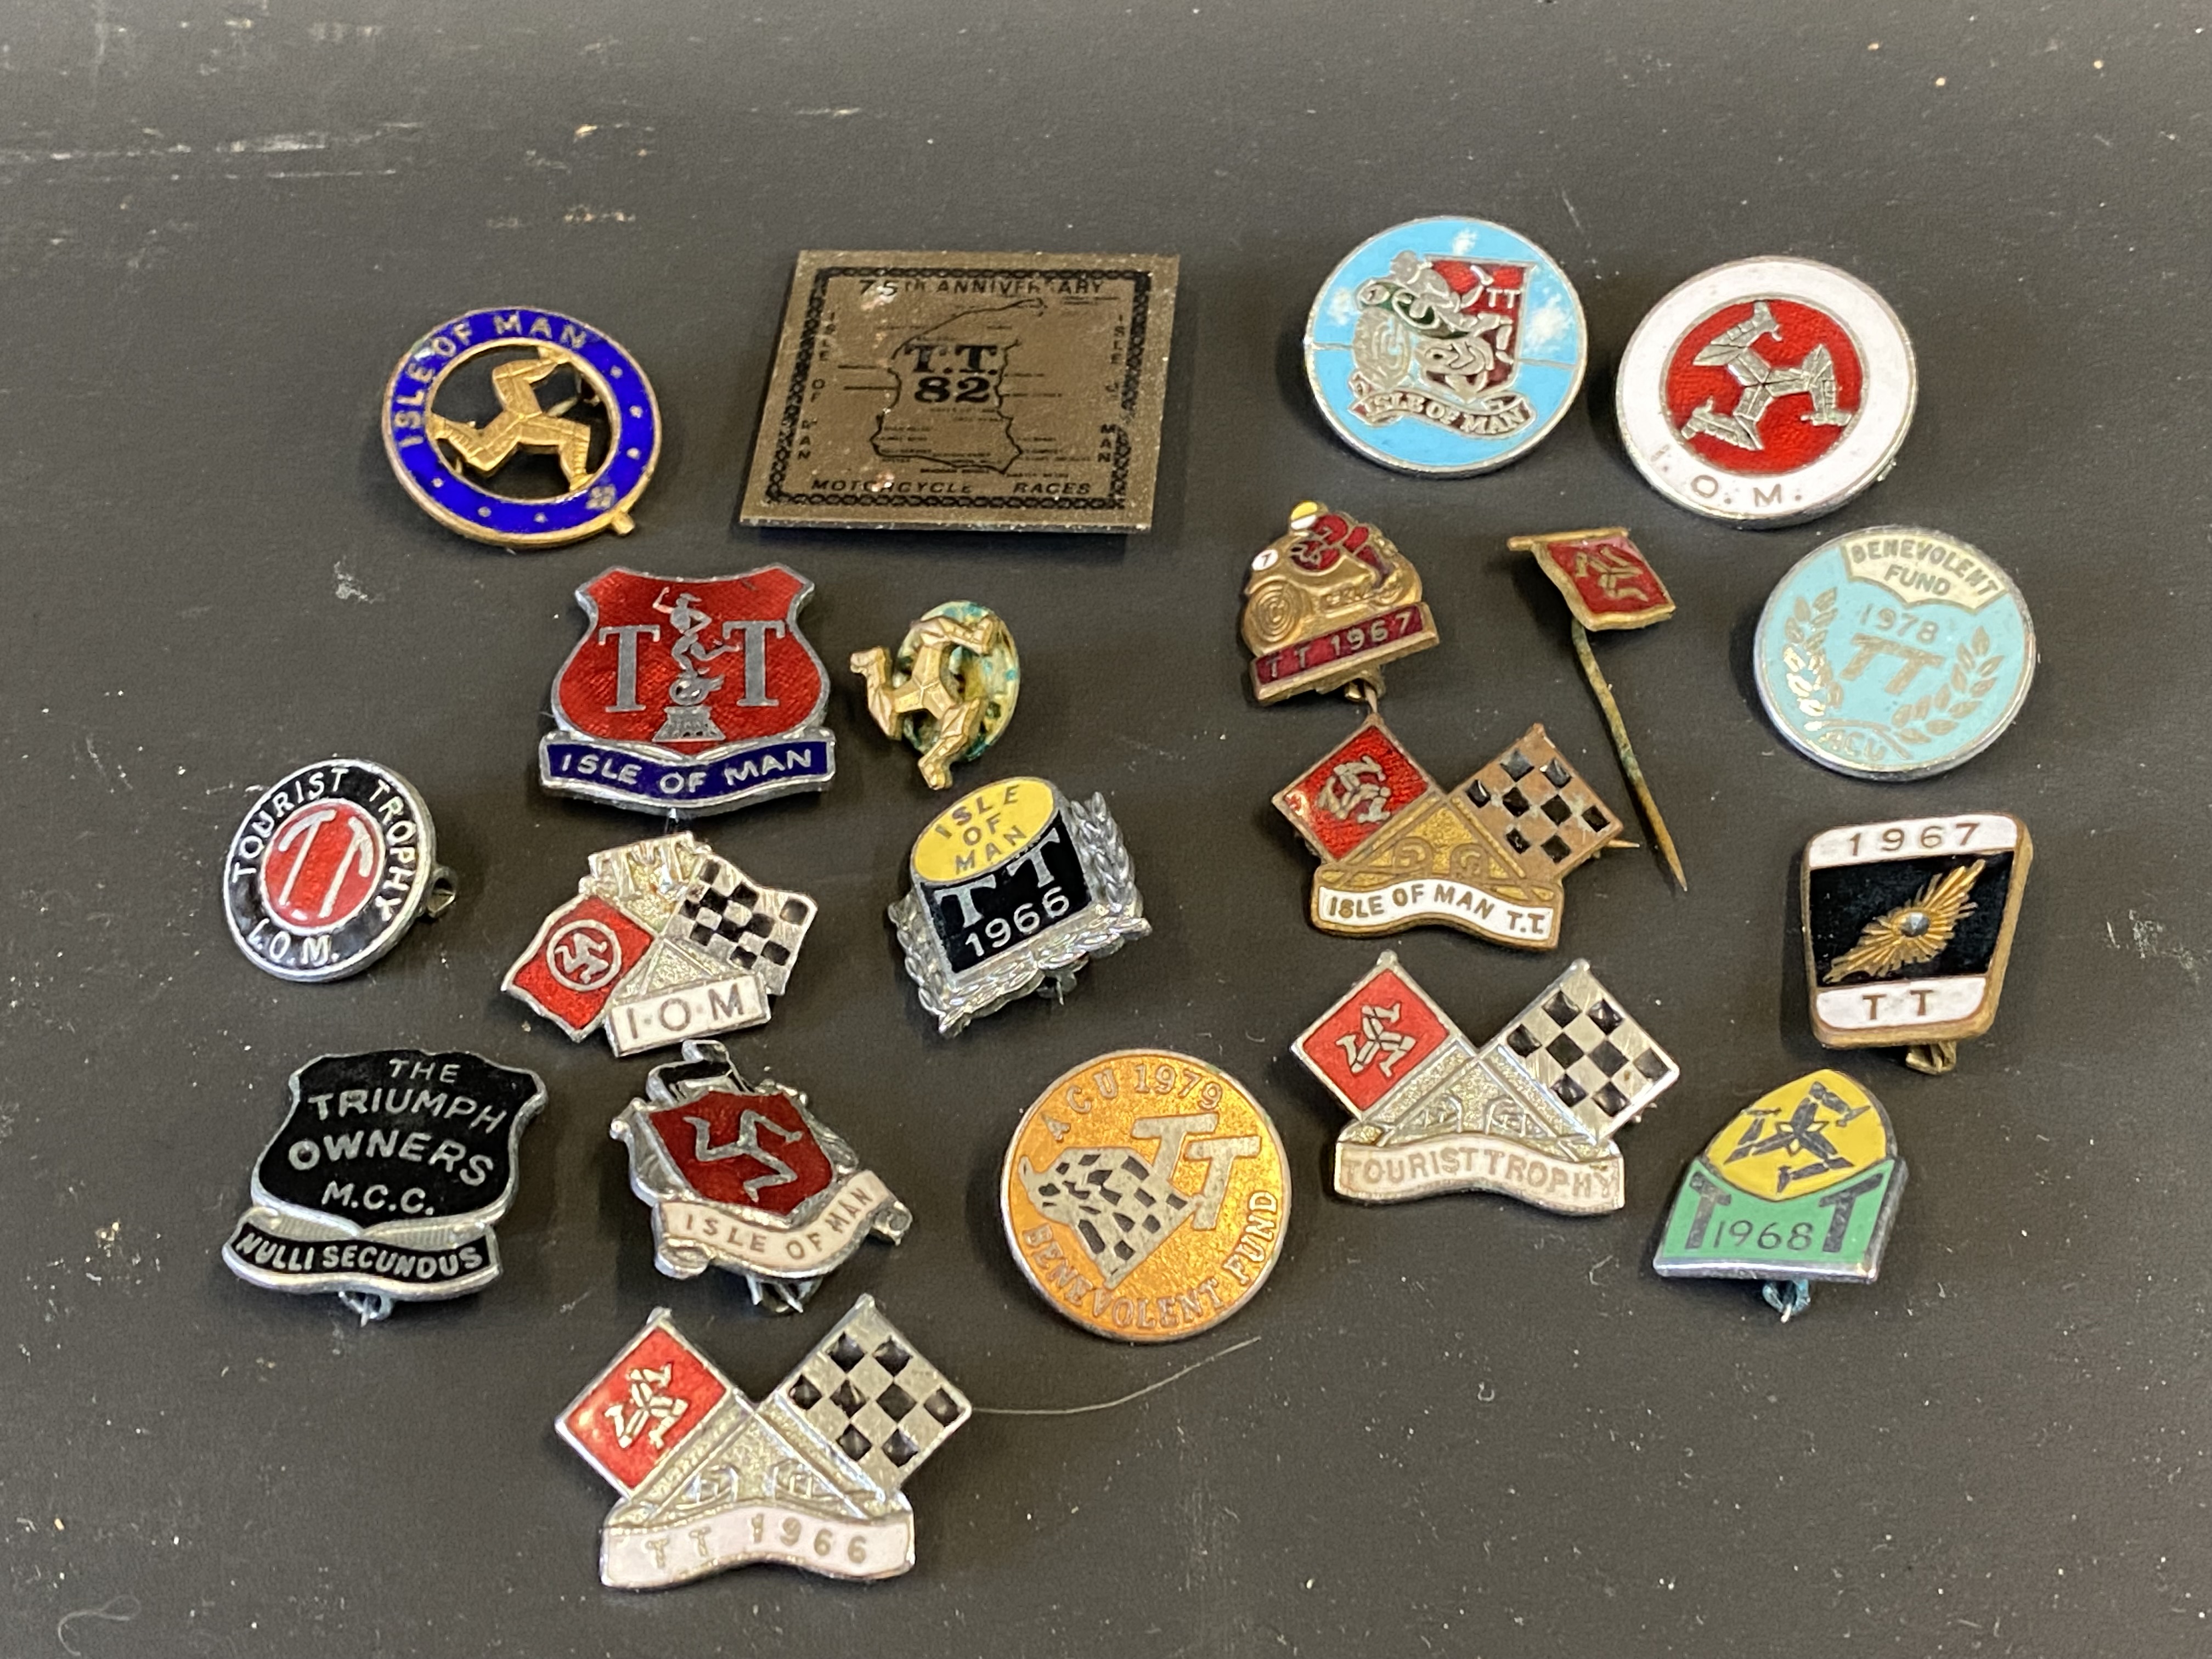 A selection of Isle of Man TT enamel lapel badges, some from the 1960s.